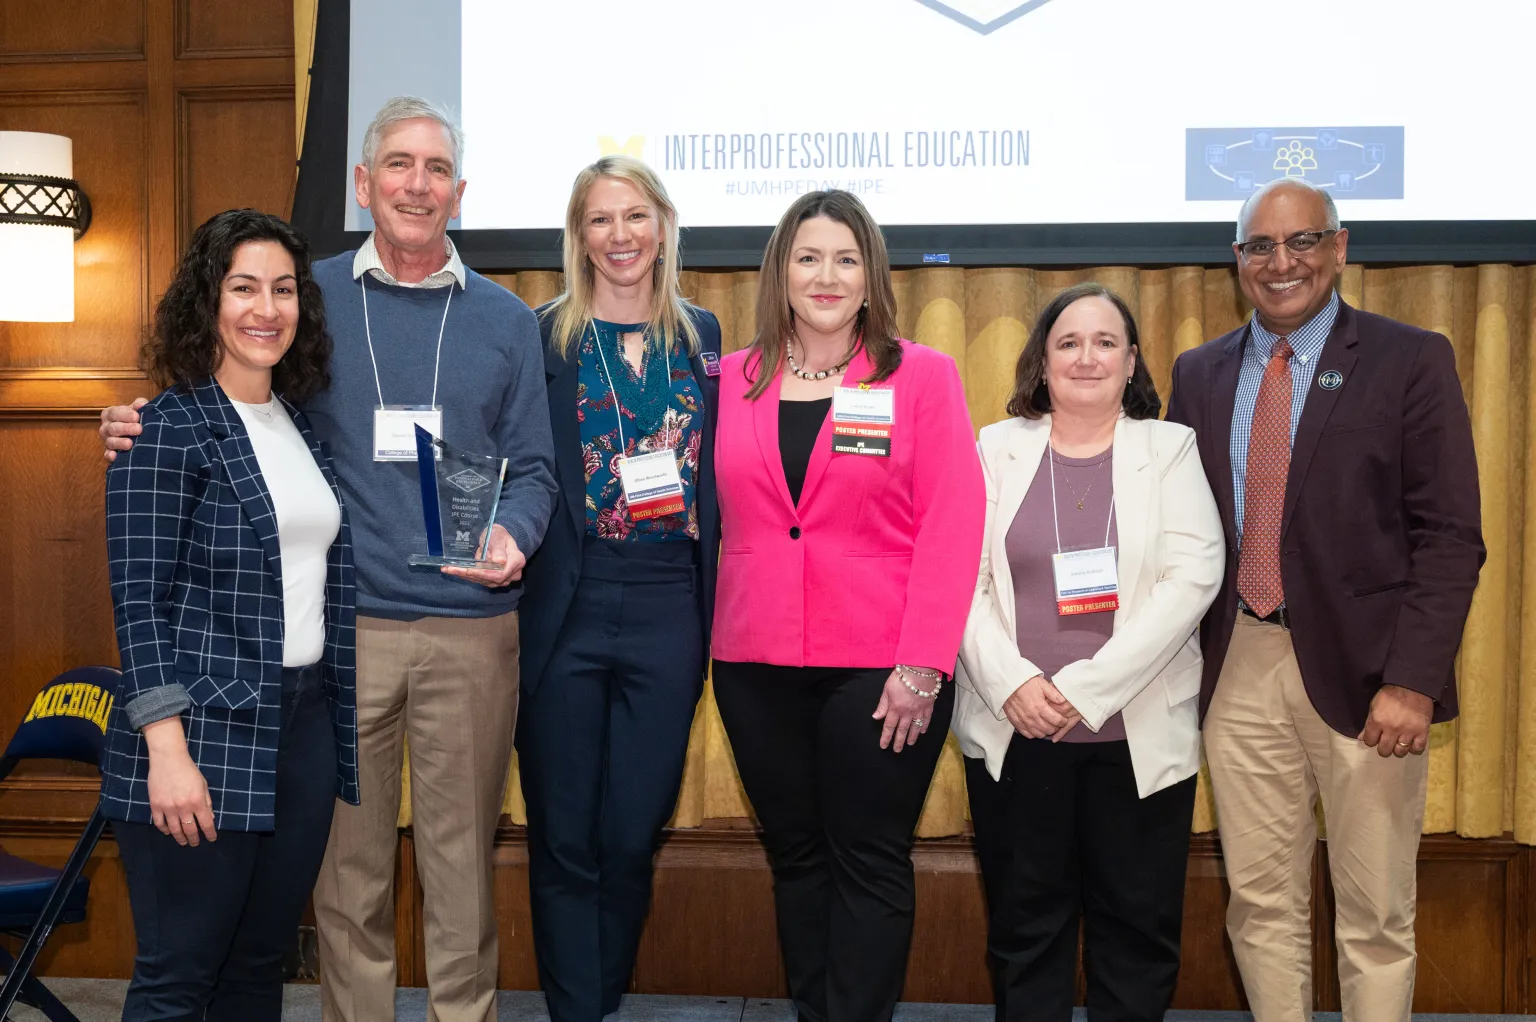 The Health and Disabilities Team with Center for Interprofessional Education leadership. Left to right: Vani Patterson, Steven Erickson, Jillian Woodworth, Laura Smith, Jeanne Andreoli and Rajesh Mangrulkar